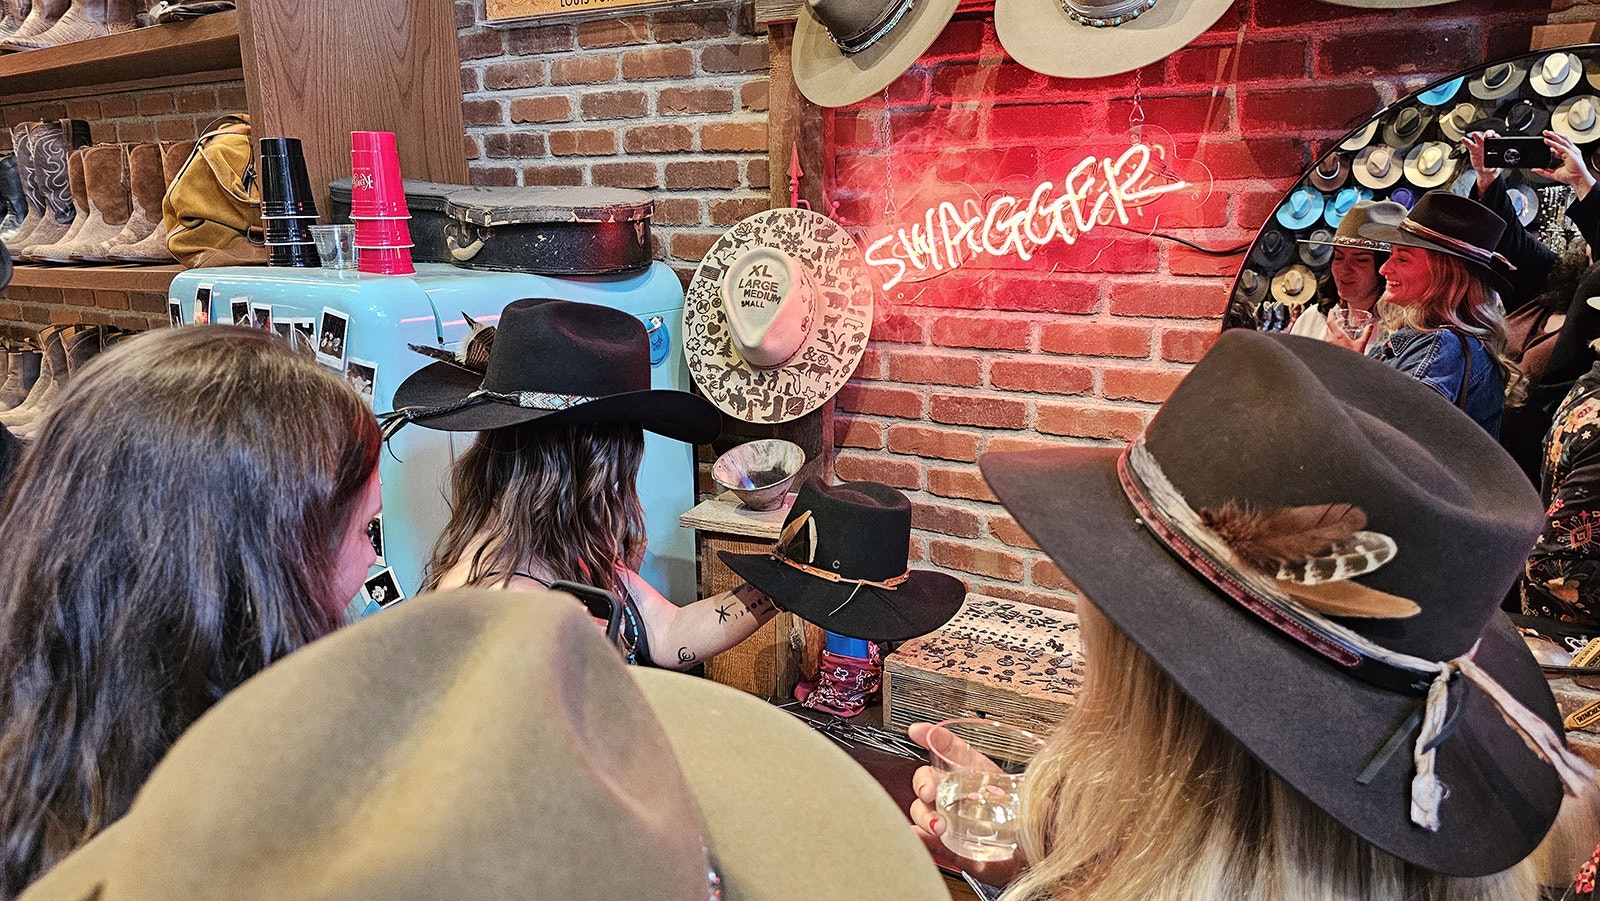 Mary Sullivan, Megan Prez and Anne Marie Cress watch while Sullivan's hat is branded. This is the final step, and the point of no return. Once the hat is branded, it is must be bought.